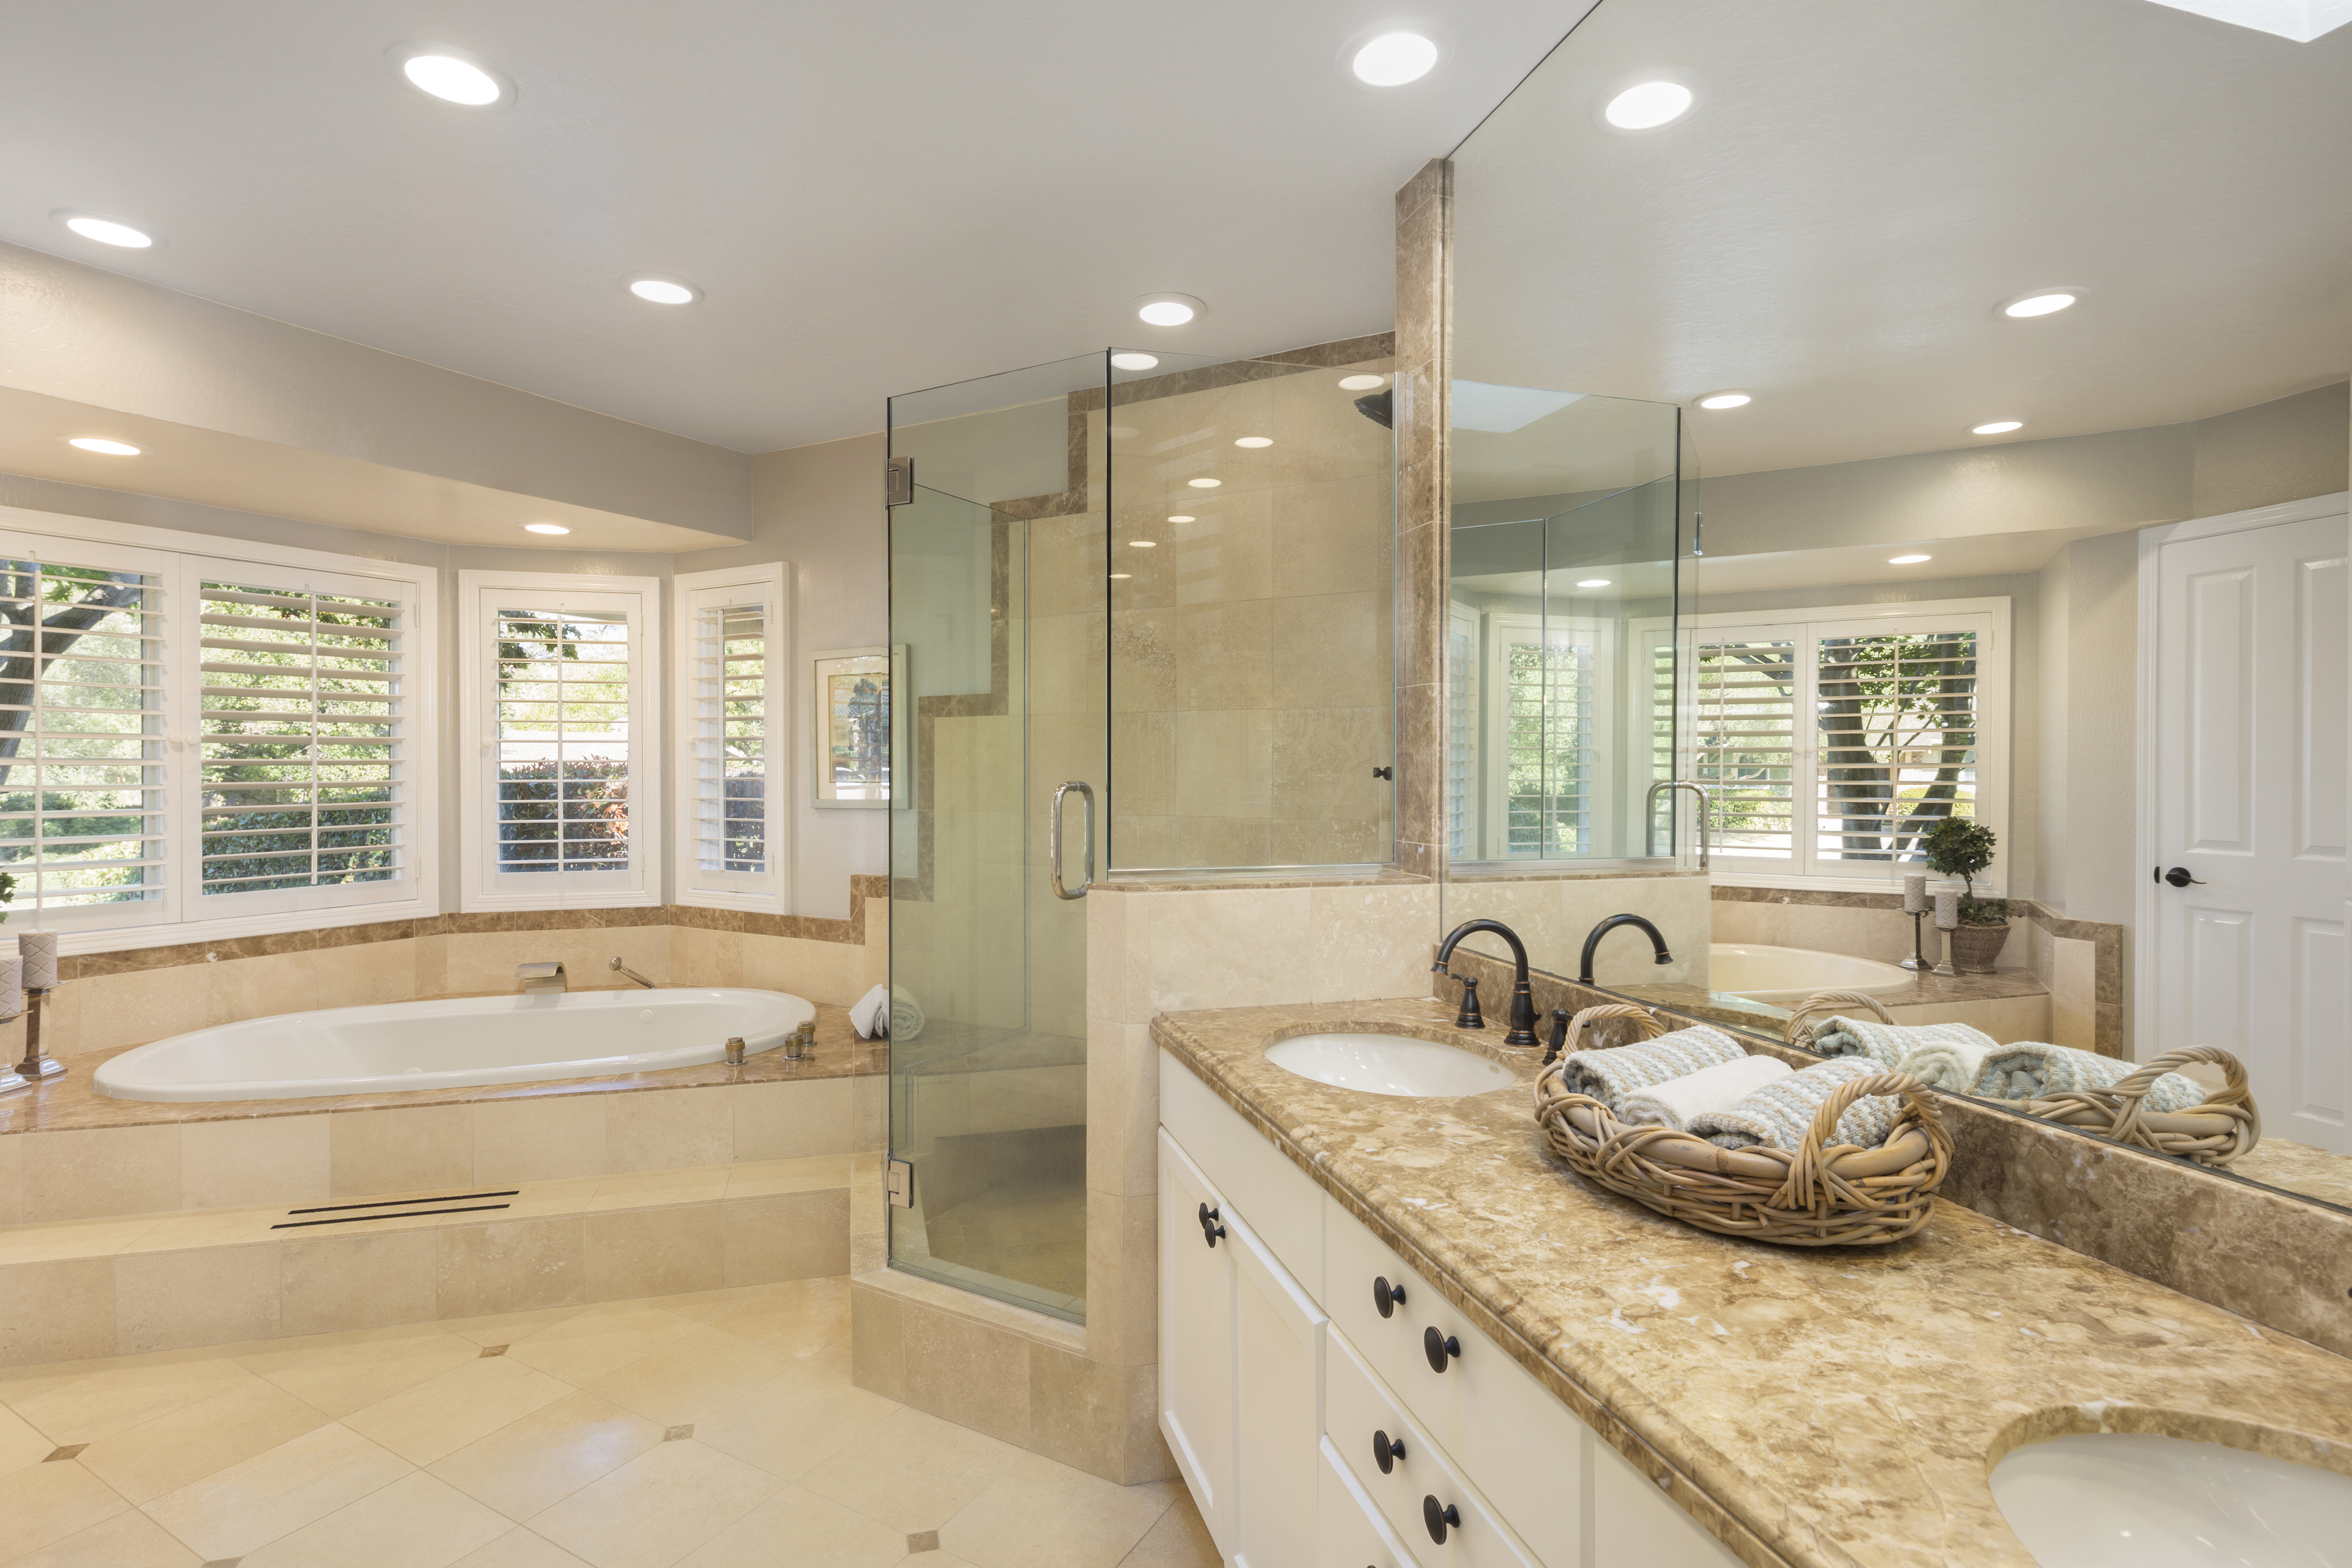 Luxury bathroom interior in marble with glass shower and oval bath tub and round shaped double sink.